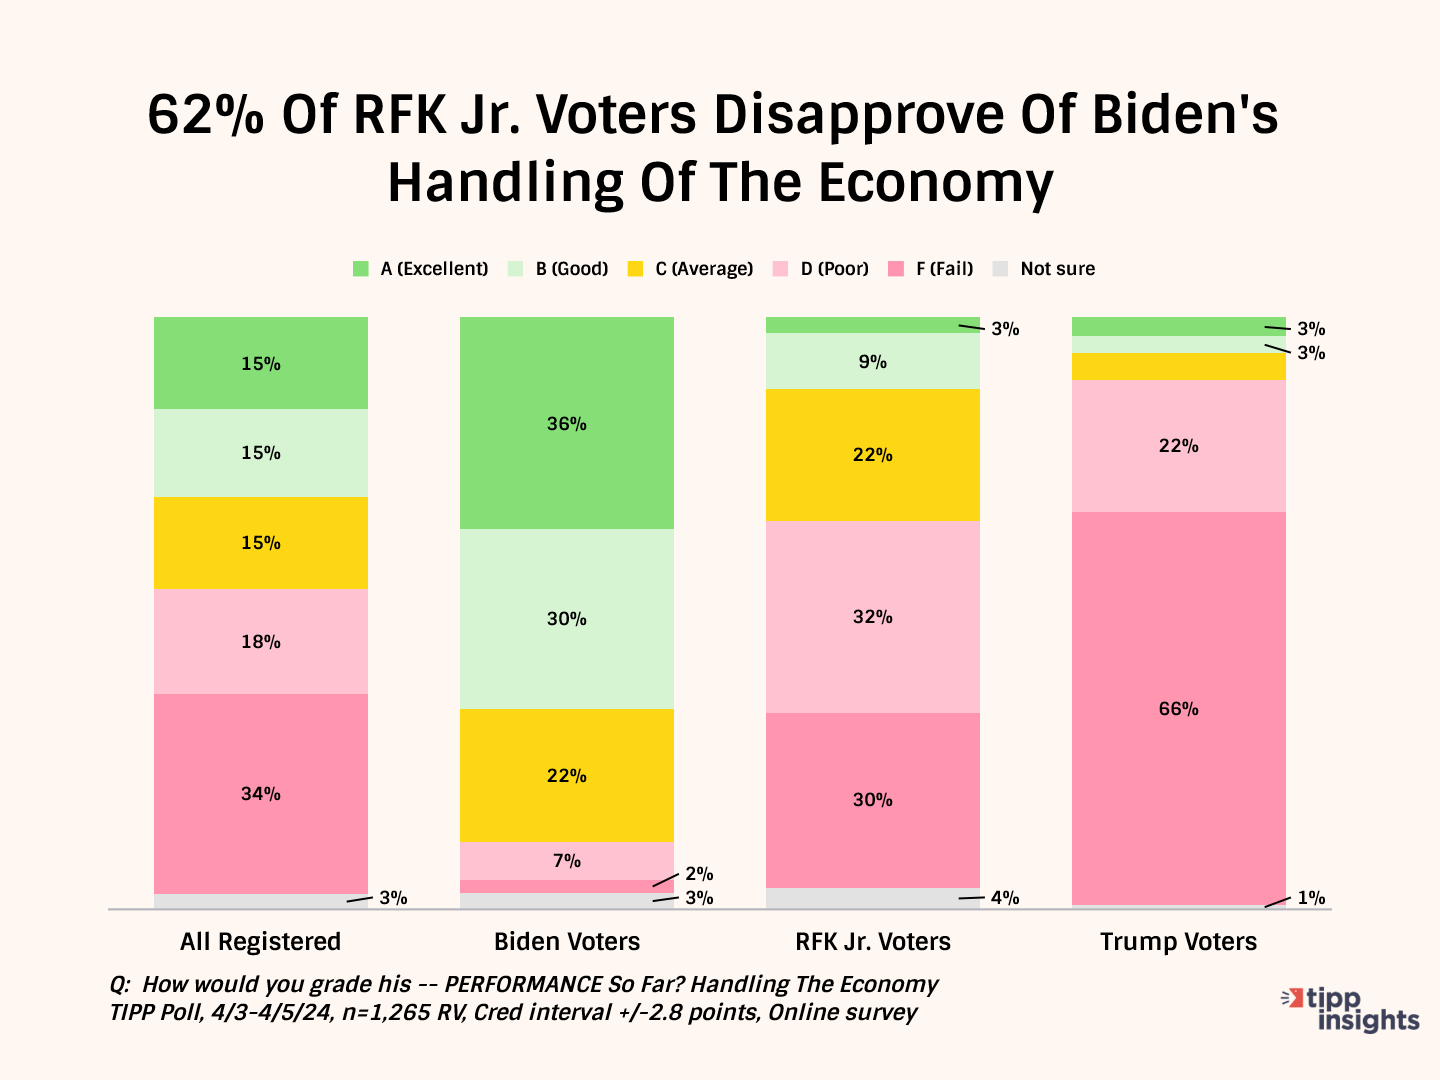 Good Luck, Joe! 13 Charts Highlight The Uphill Task Of Attracting RFK Jr. Voters